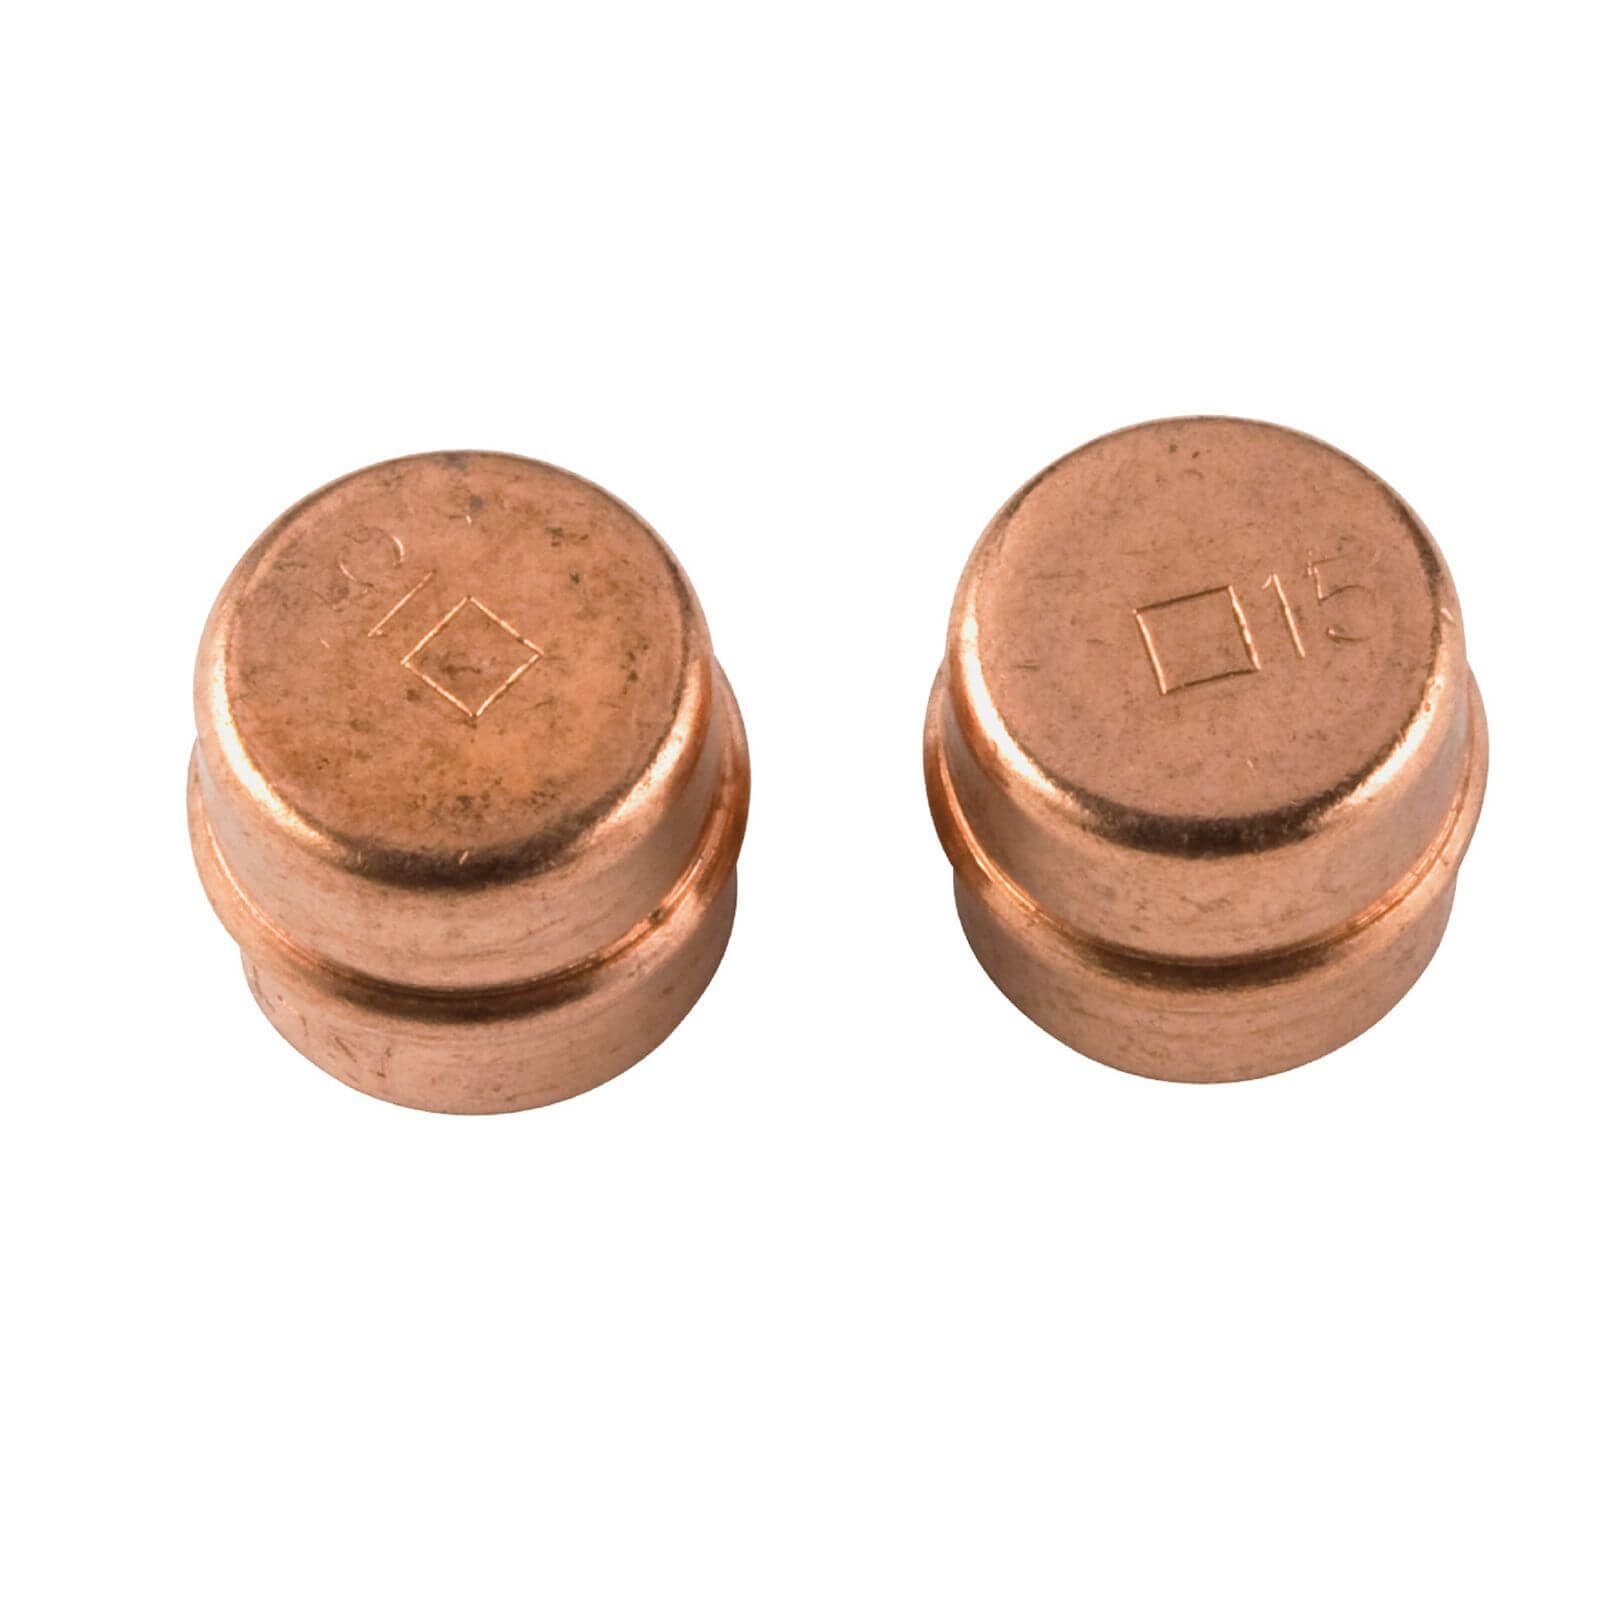 Solder Ring Stopend - Copper - 15mm - 2 Pack